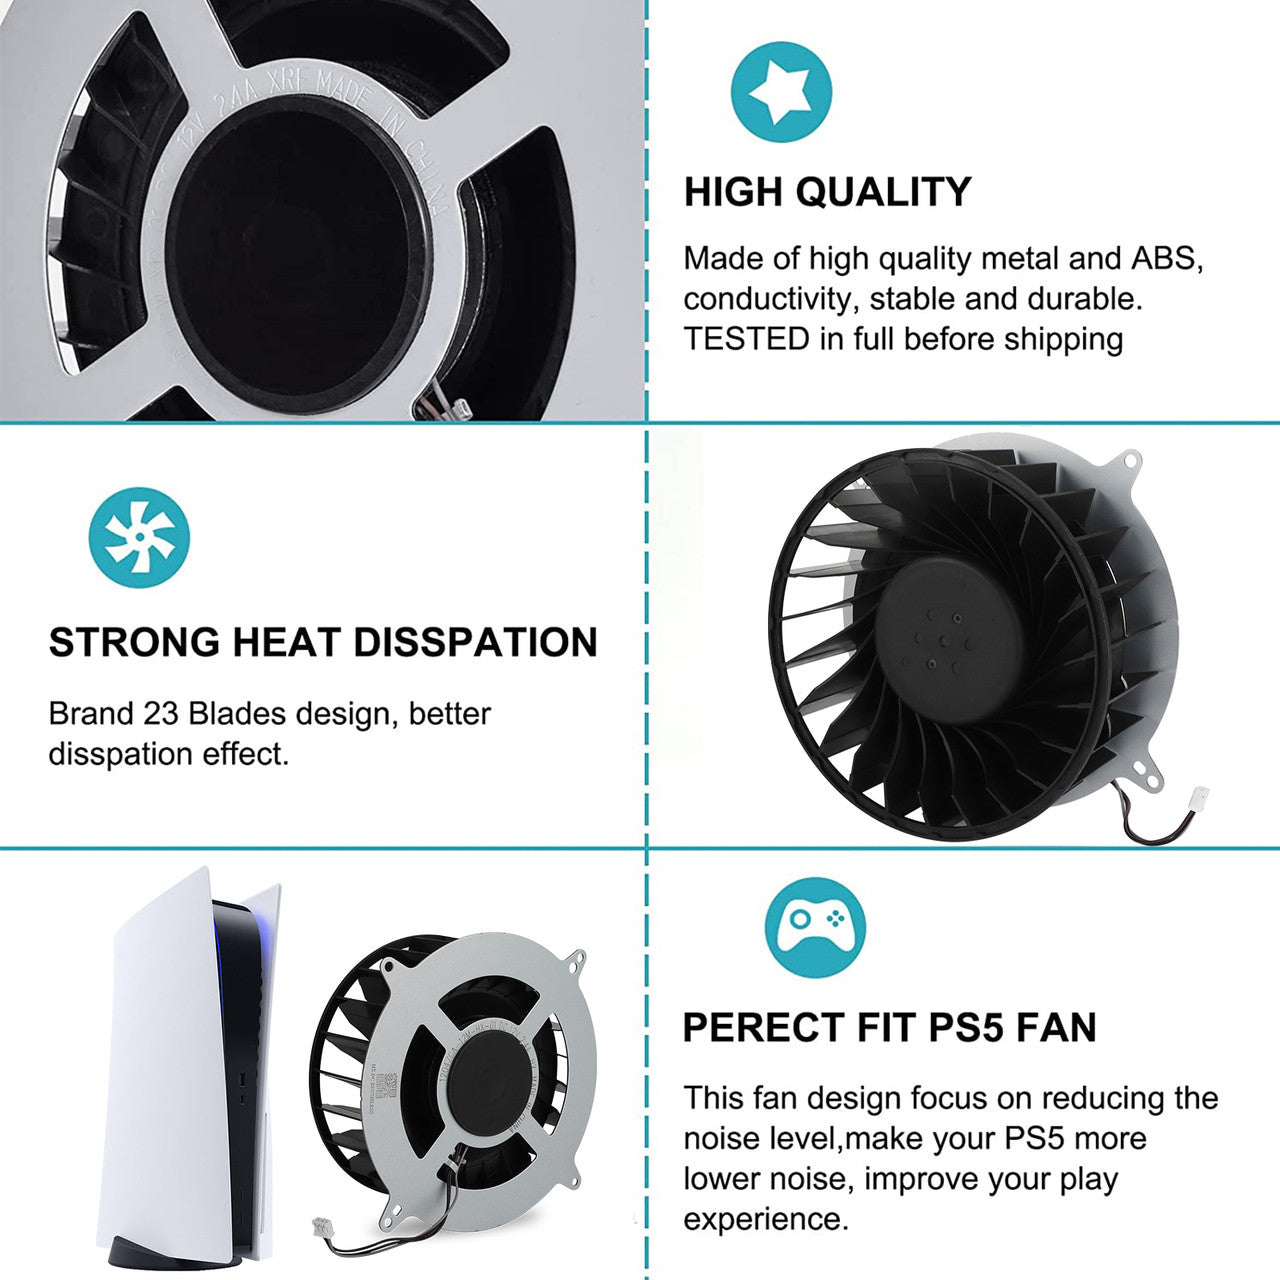 Cooling Fan Accessories for PS5 - LED Light,for Both Disc and Digital Editions,d,High-Quality silent 23 blades PS5 fan replacement